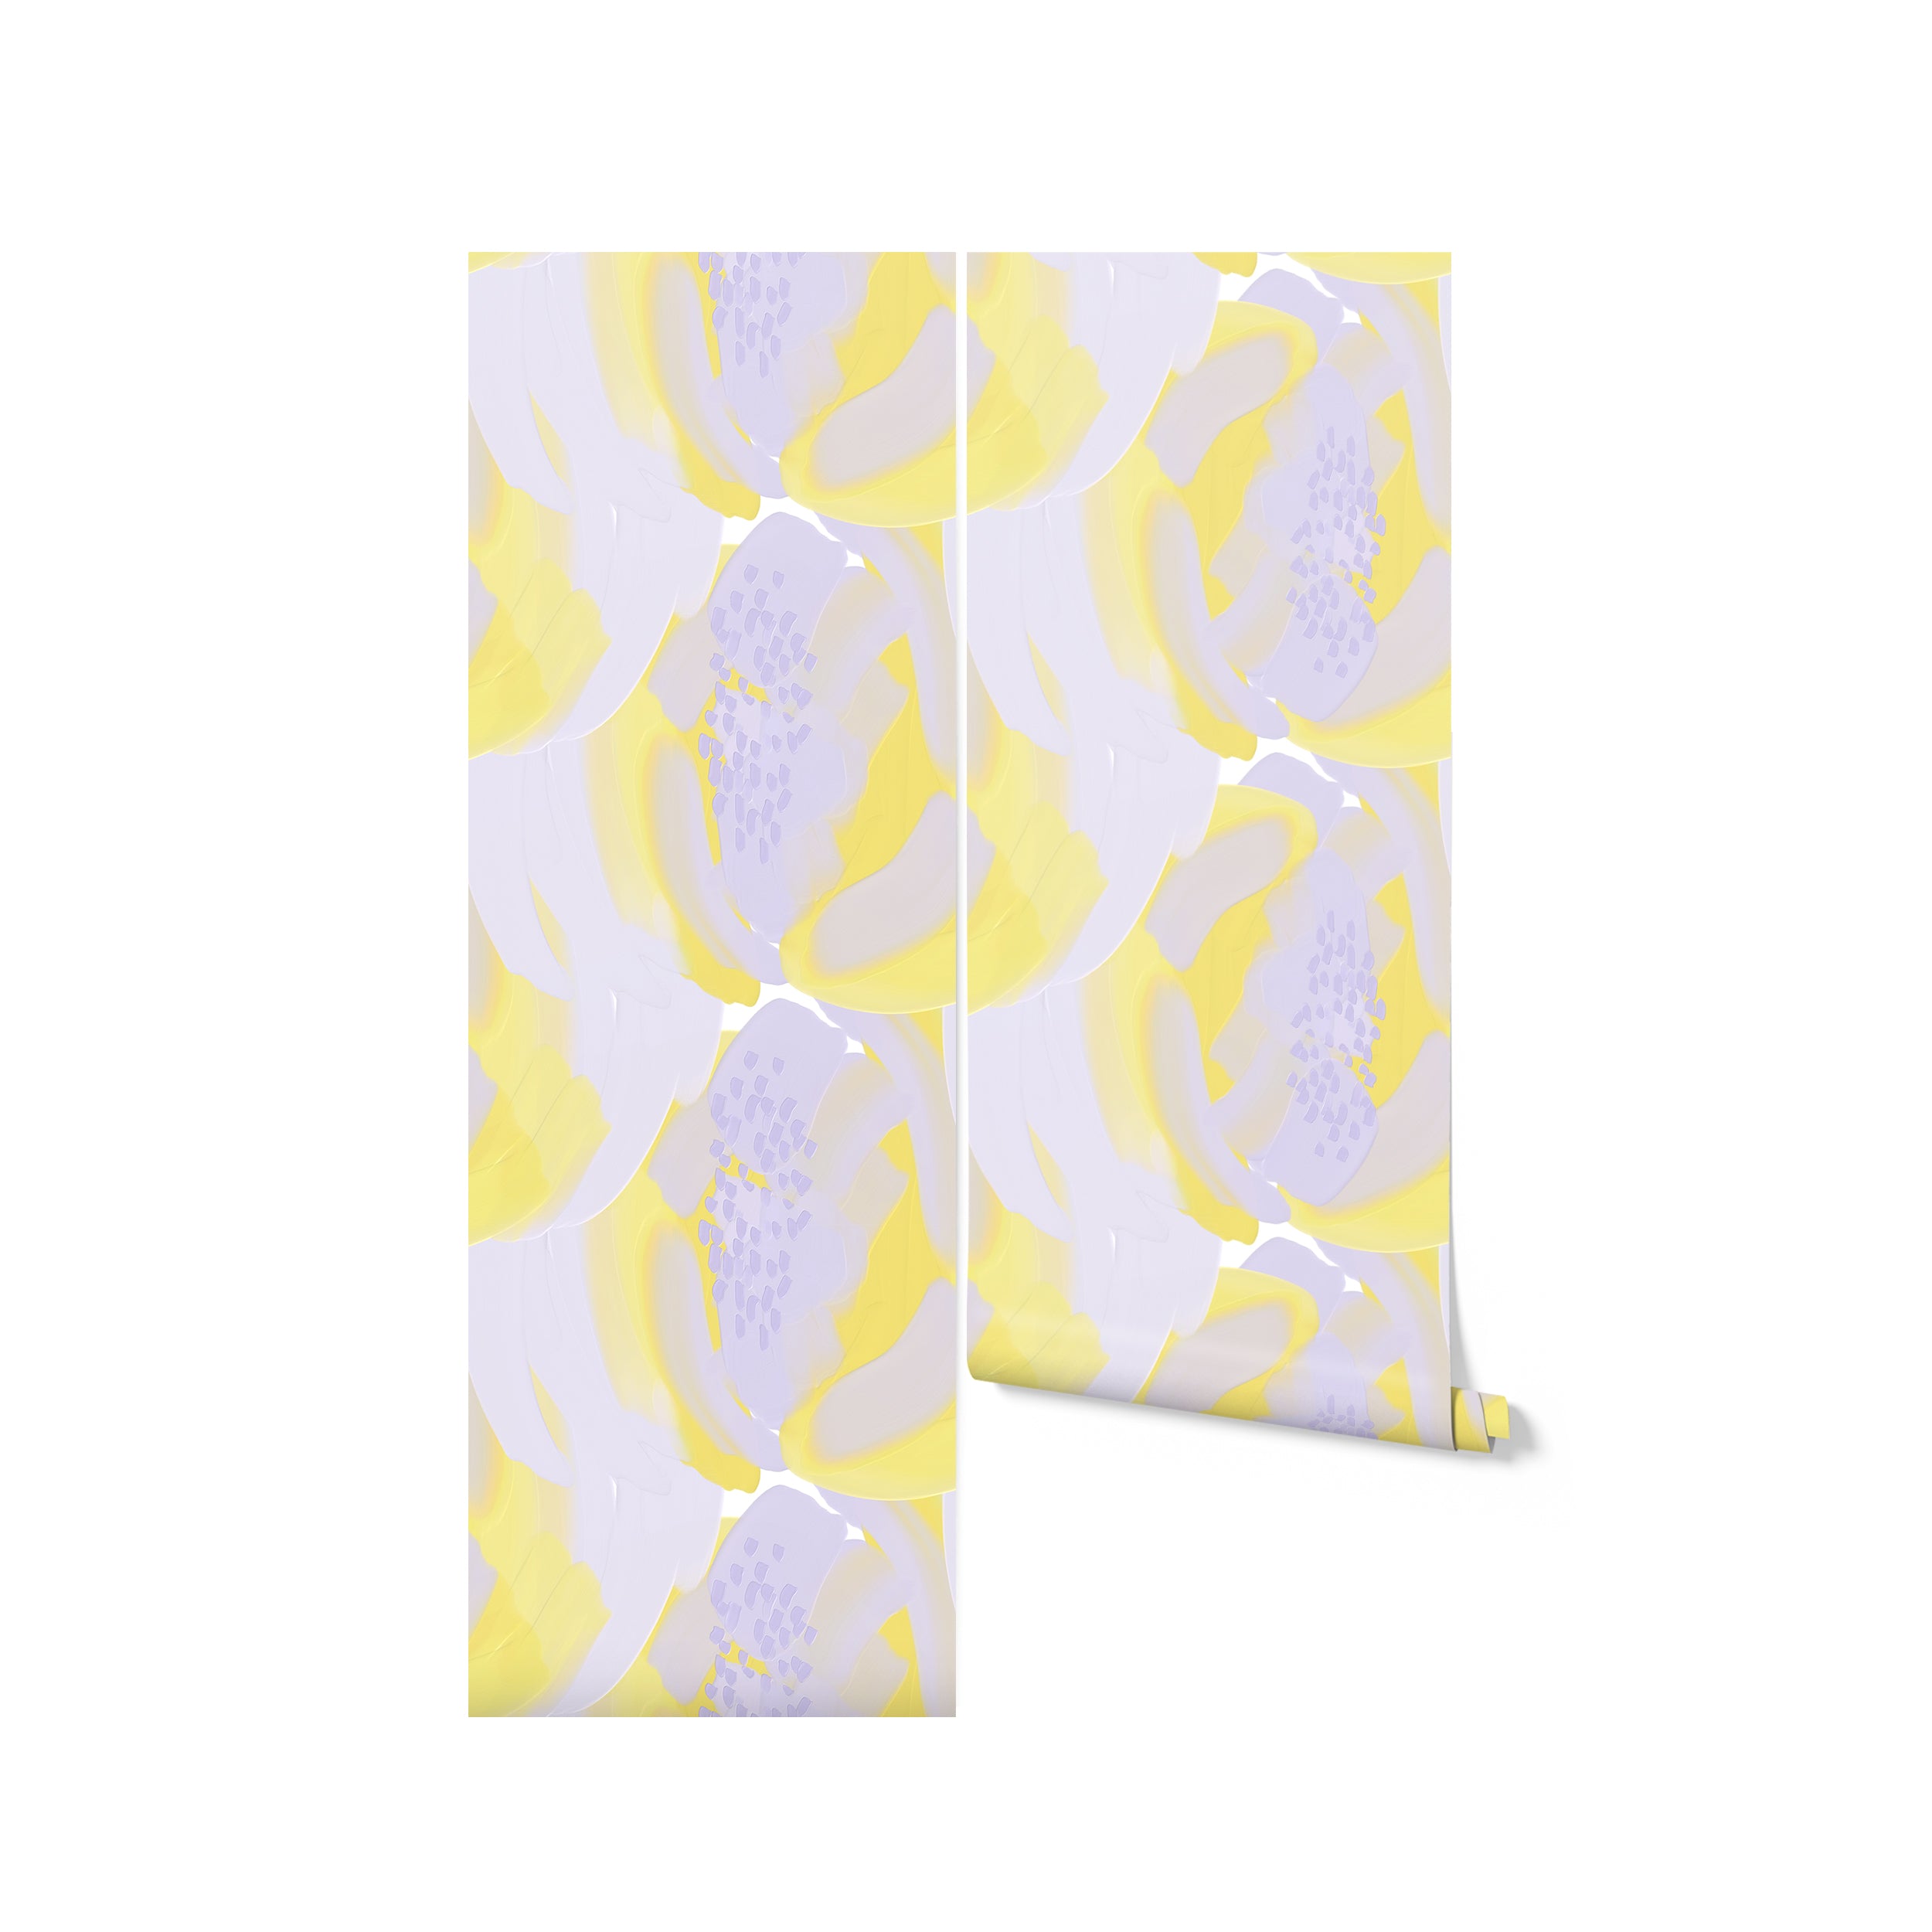 Rolled wallpaper featuring abstract oil paint fruit pattern in yellow and lavender